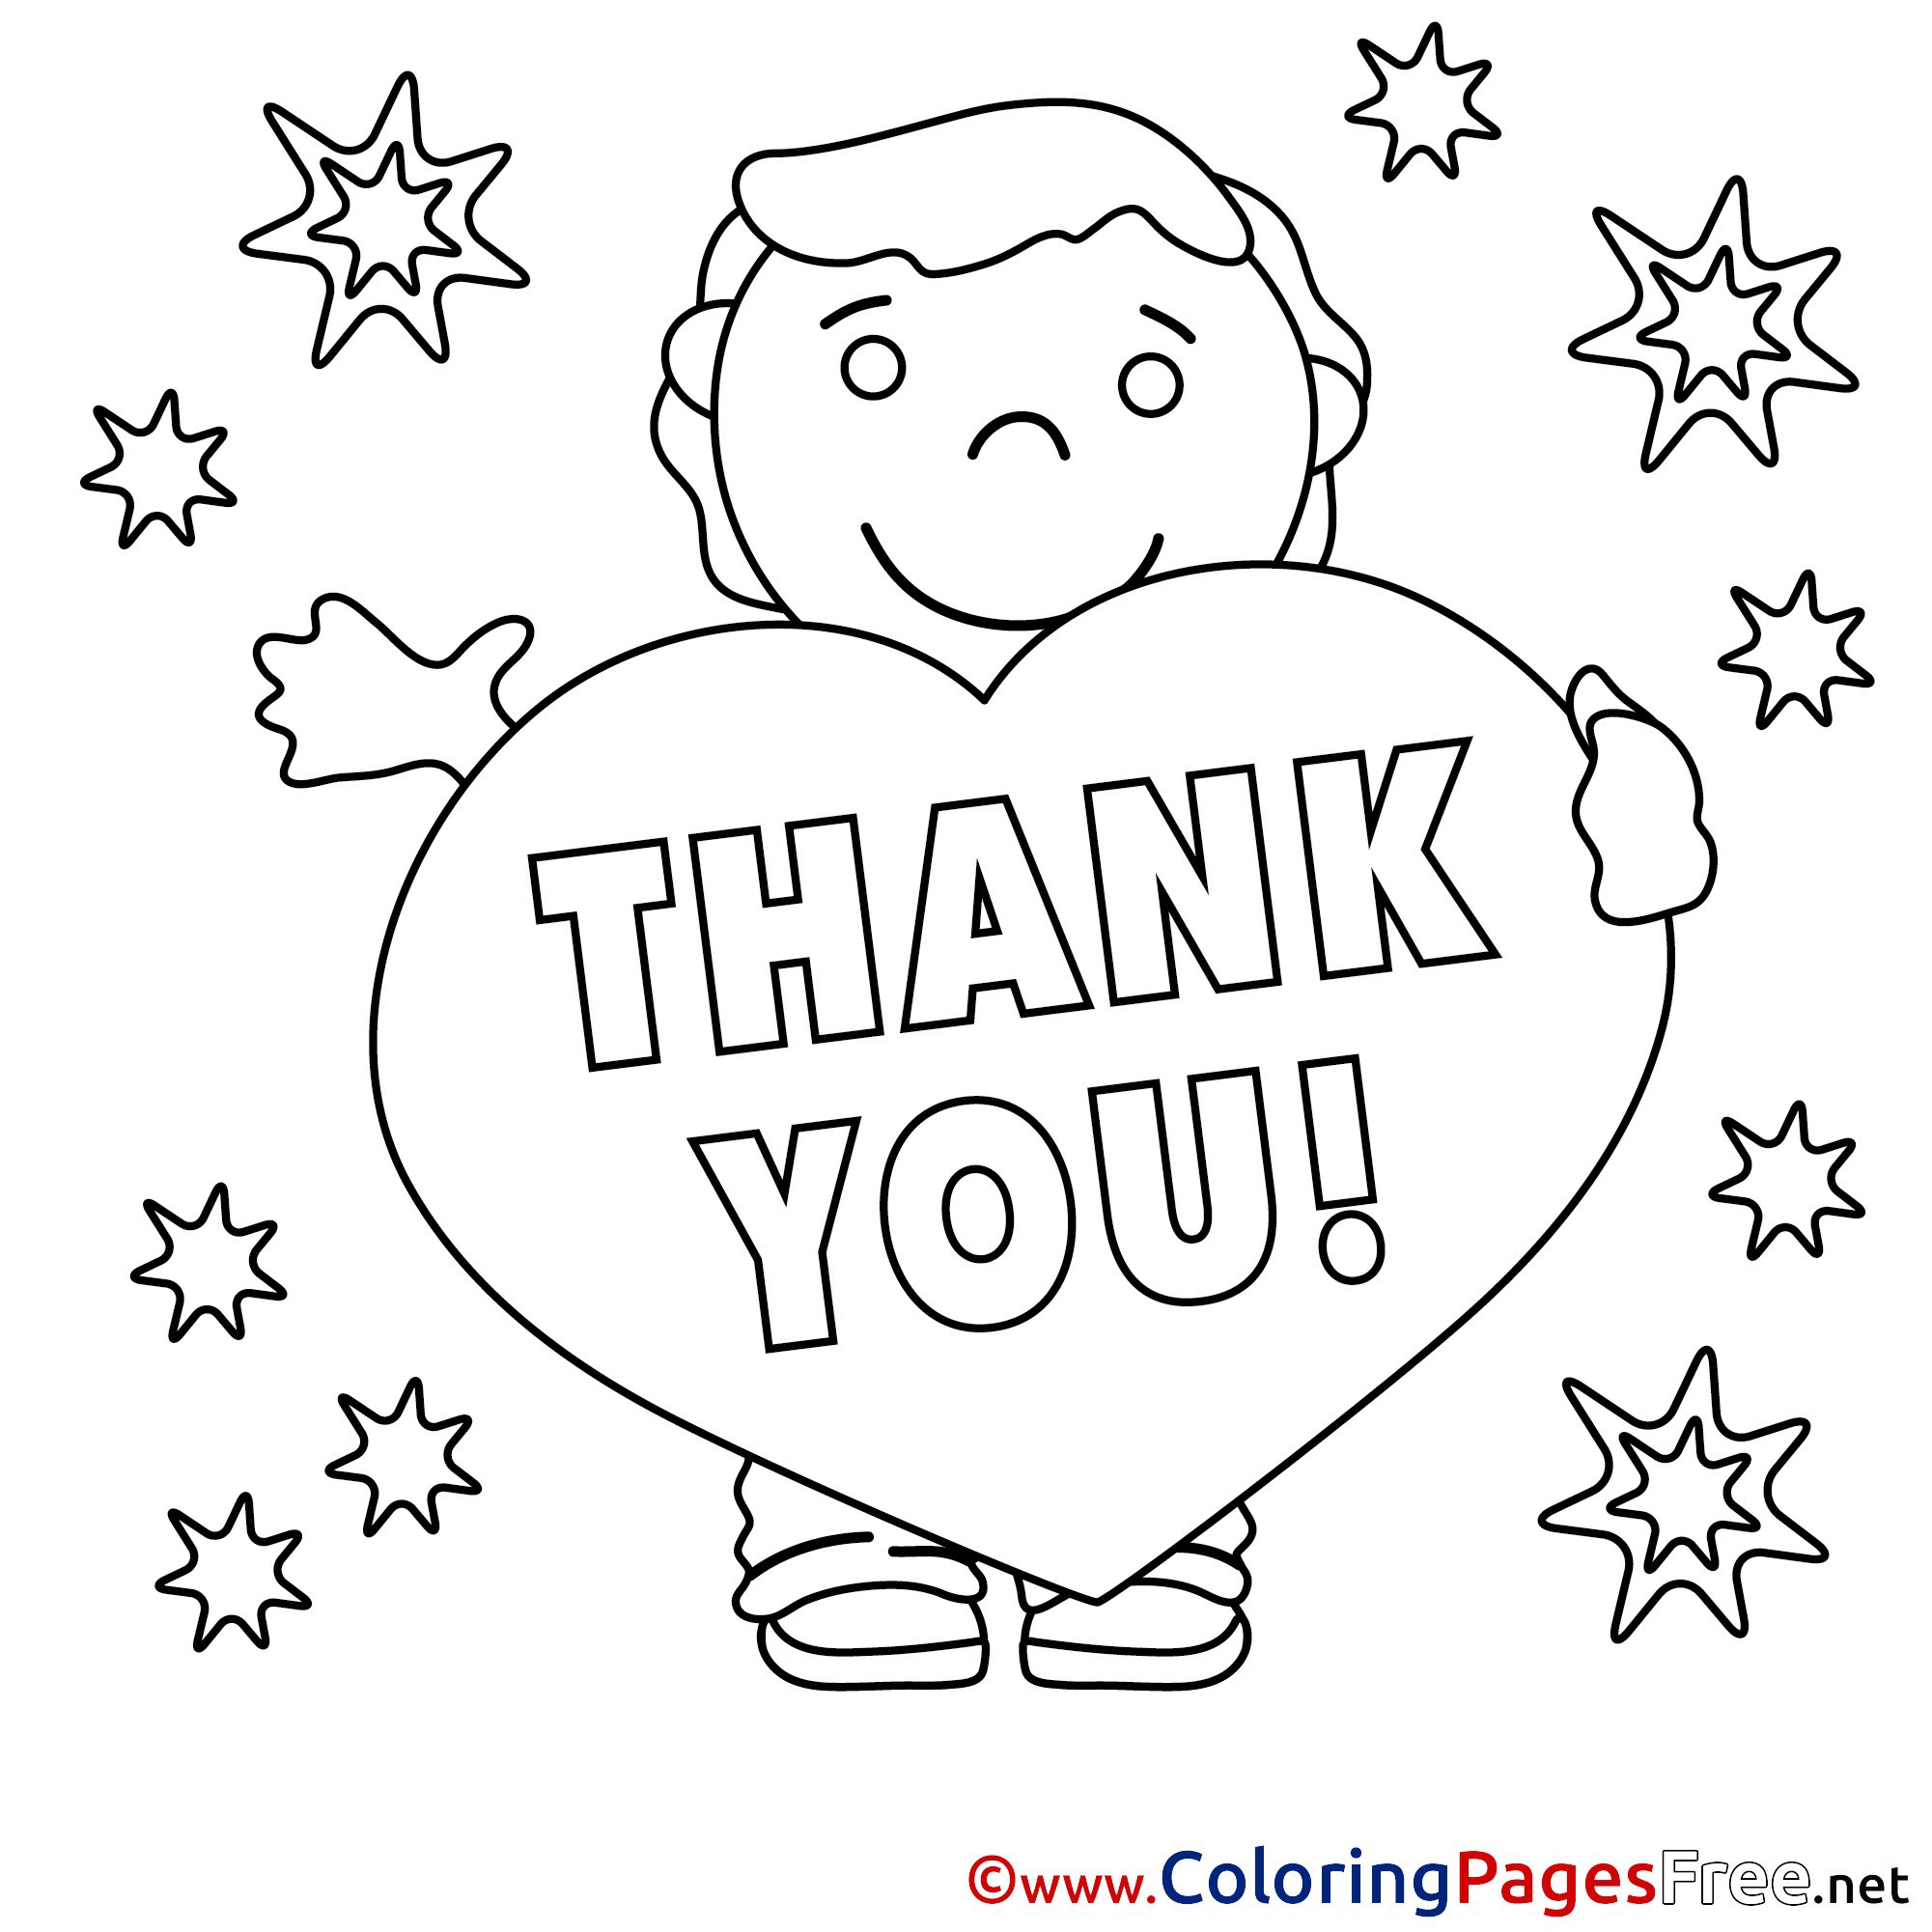 966 Simple Printable Thank You Coloring Pages for Adult